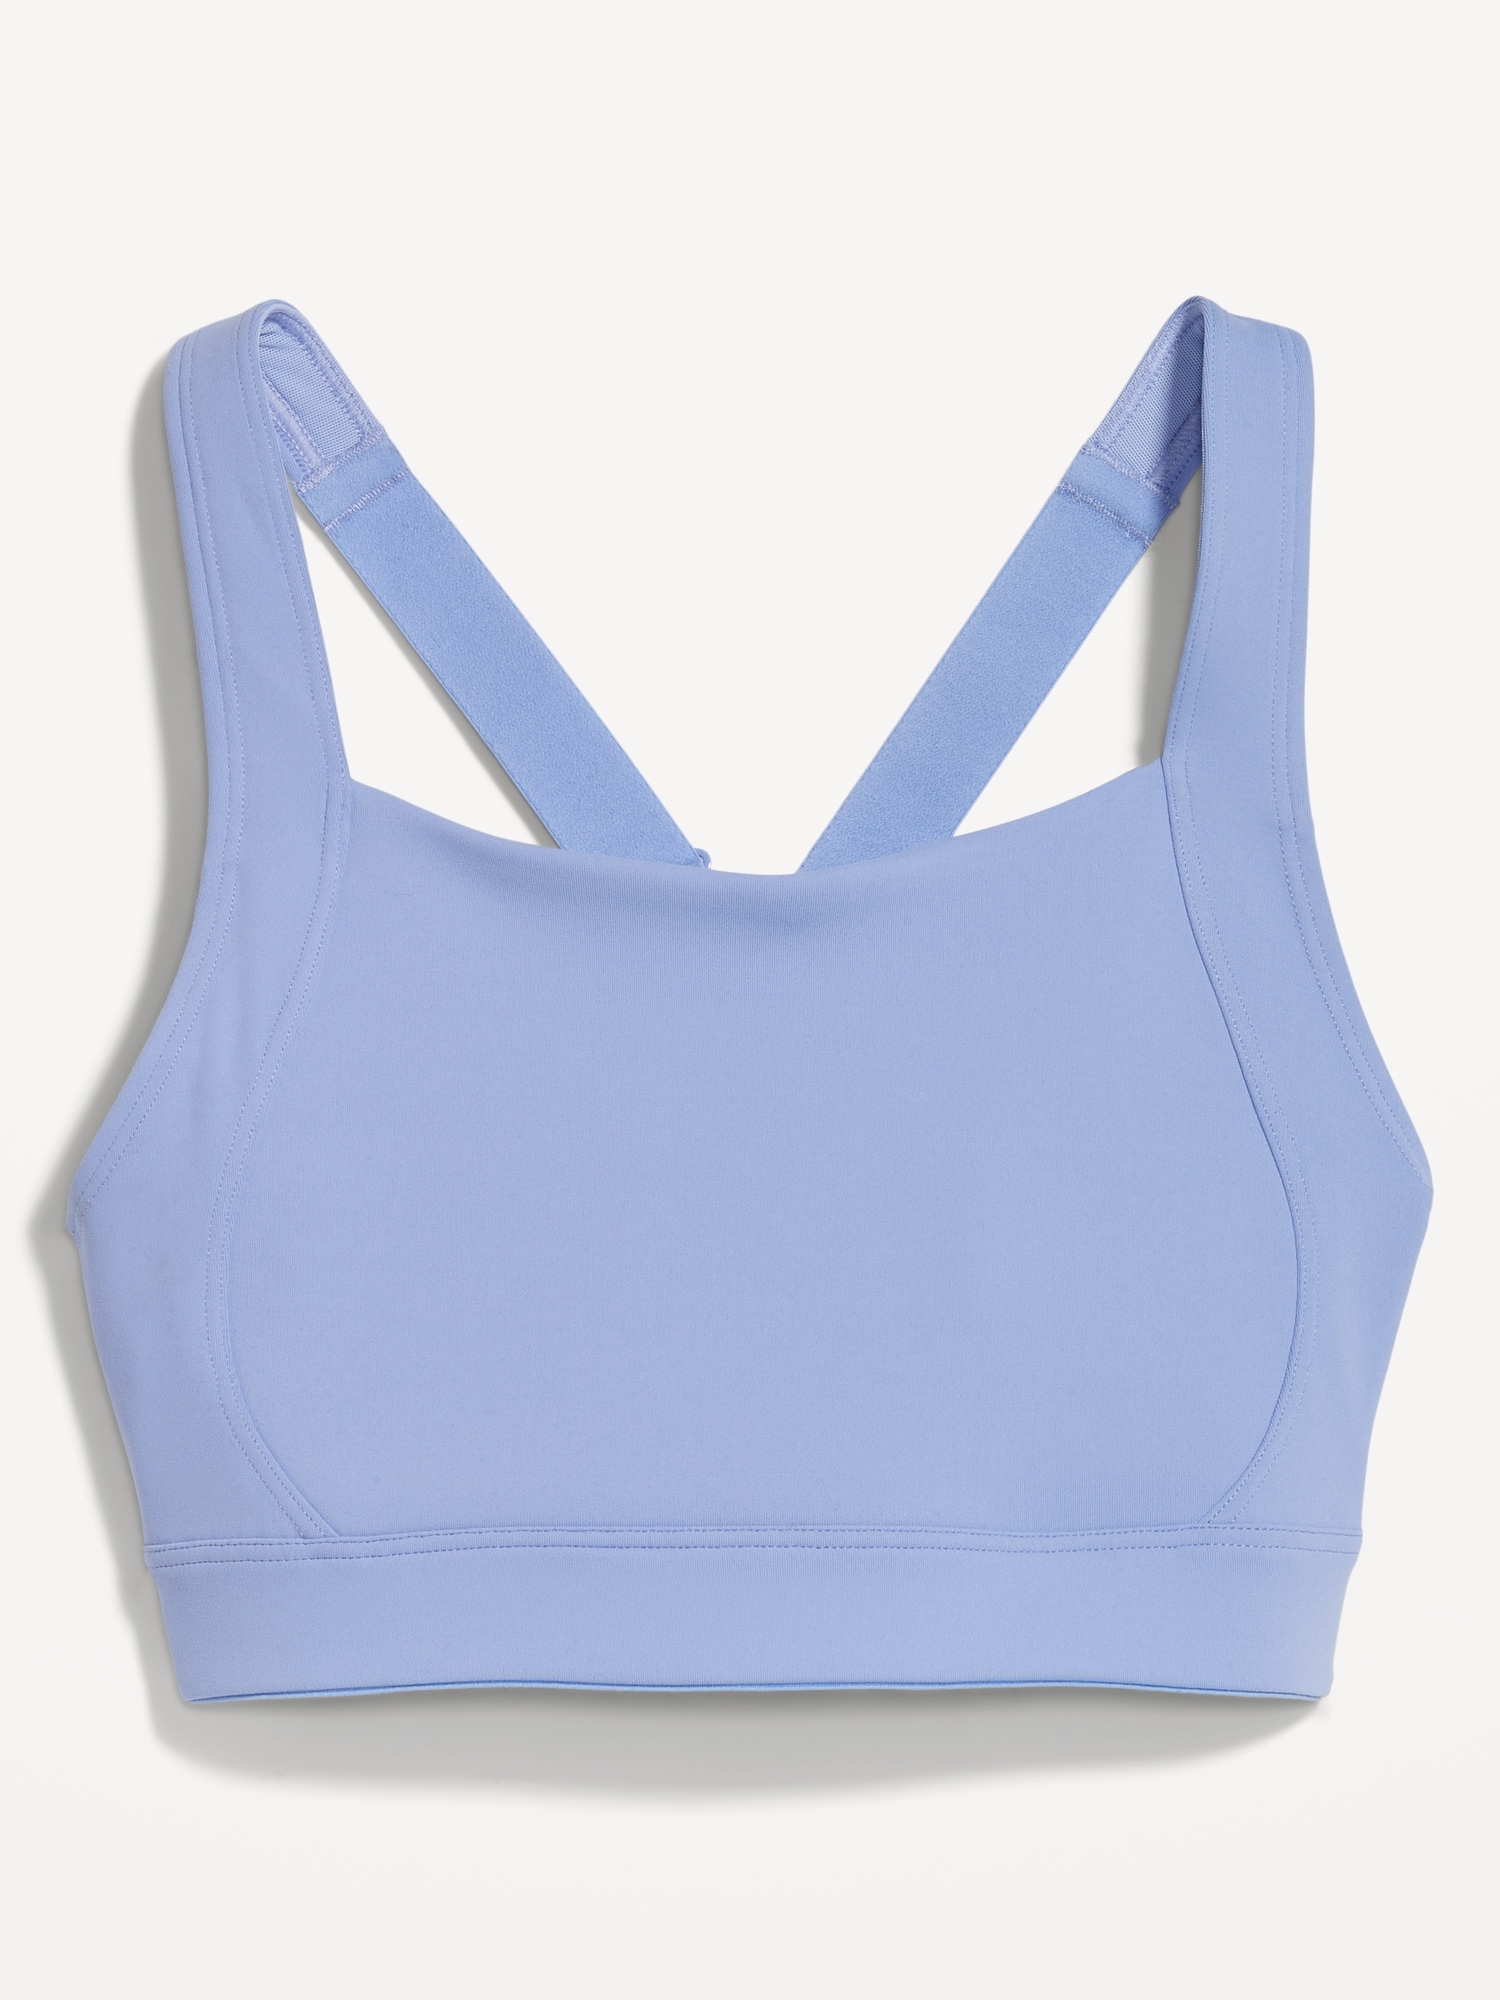 Sports Illustrated Extra Firm Support Sports Bra Plus, Color: Blue Sapphire  - JCPenney